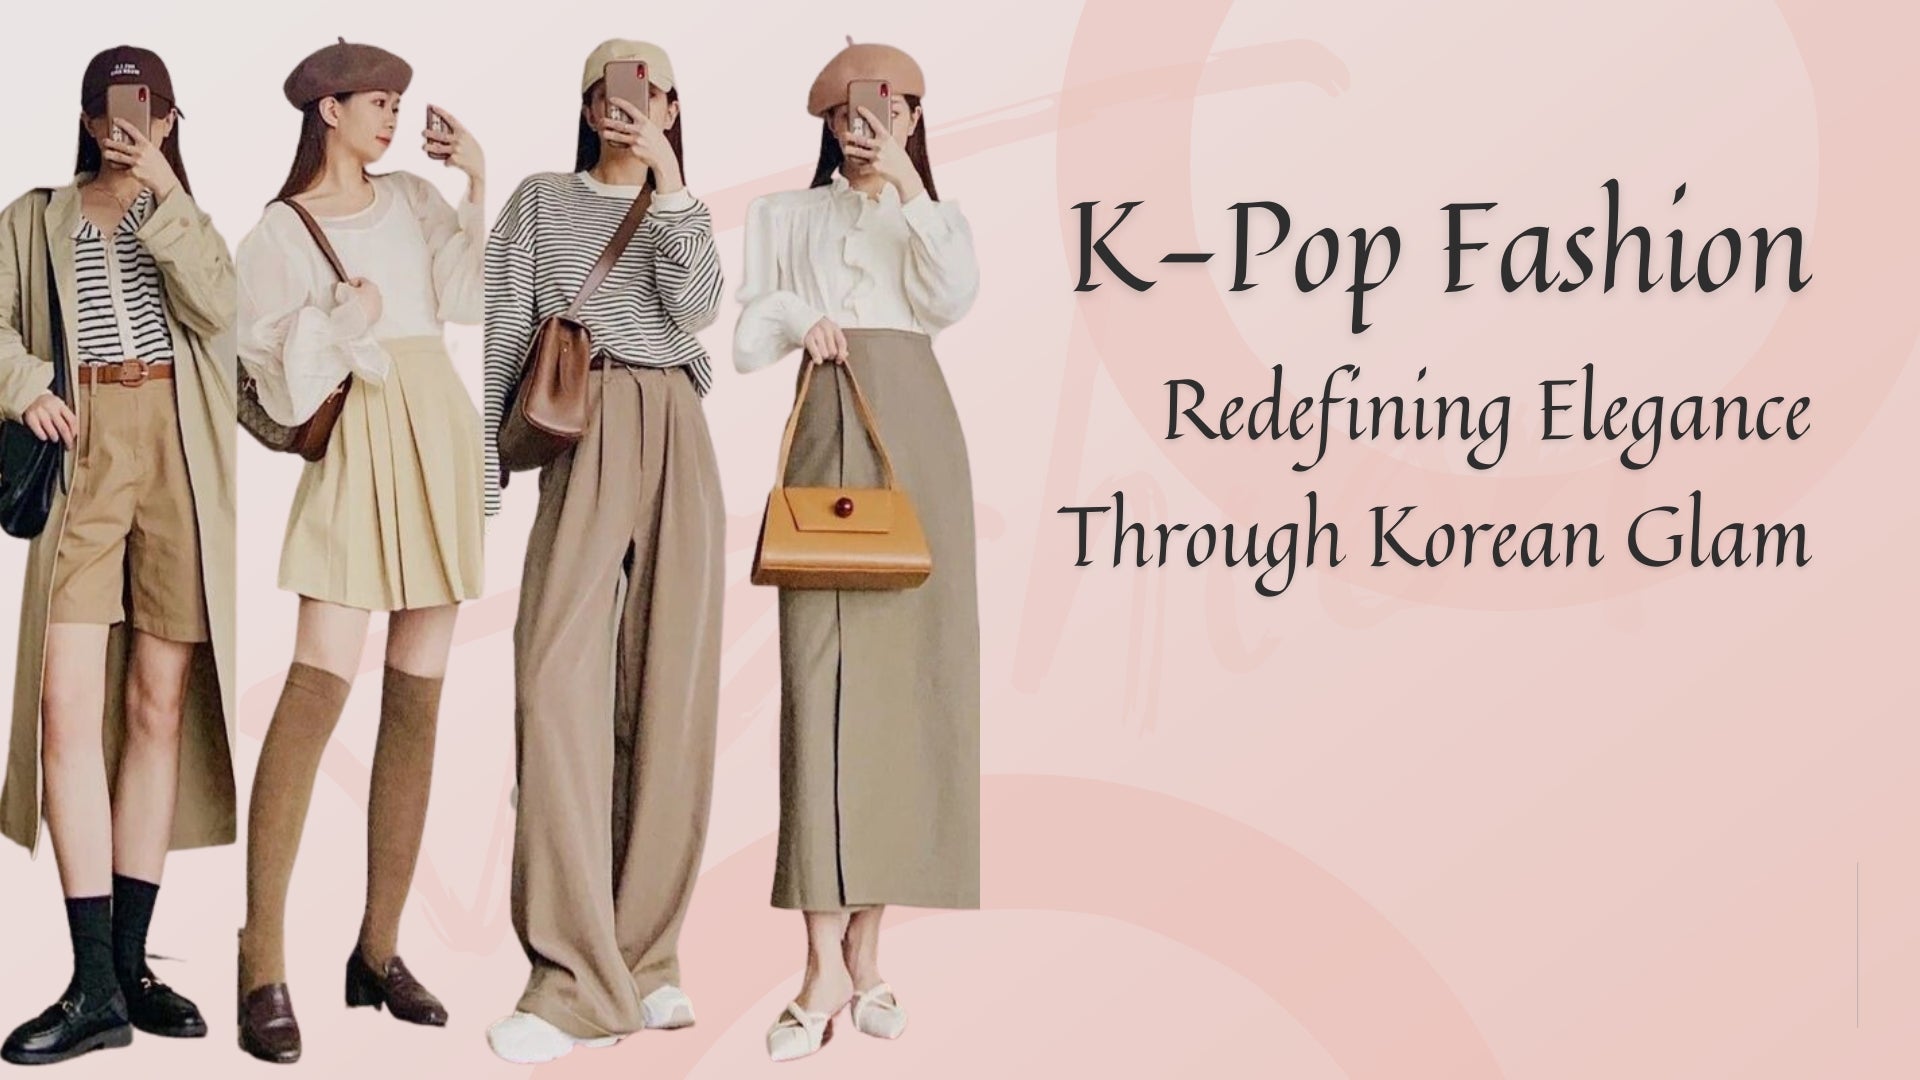 KPOP Outfit Shop - Get Your Favorite Idol Fashion - Shop Now!